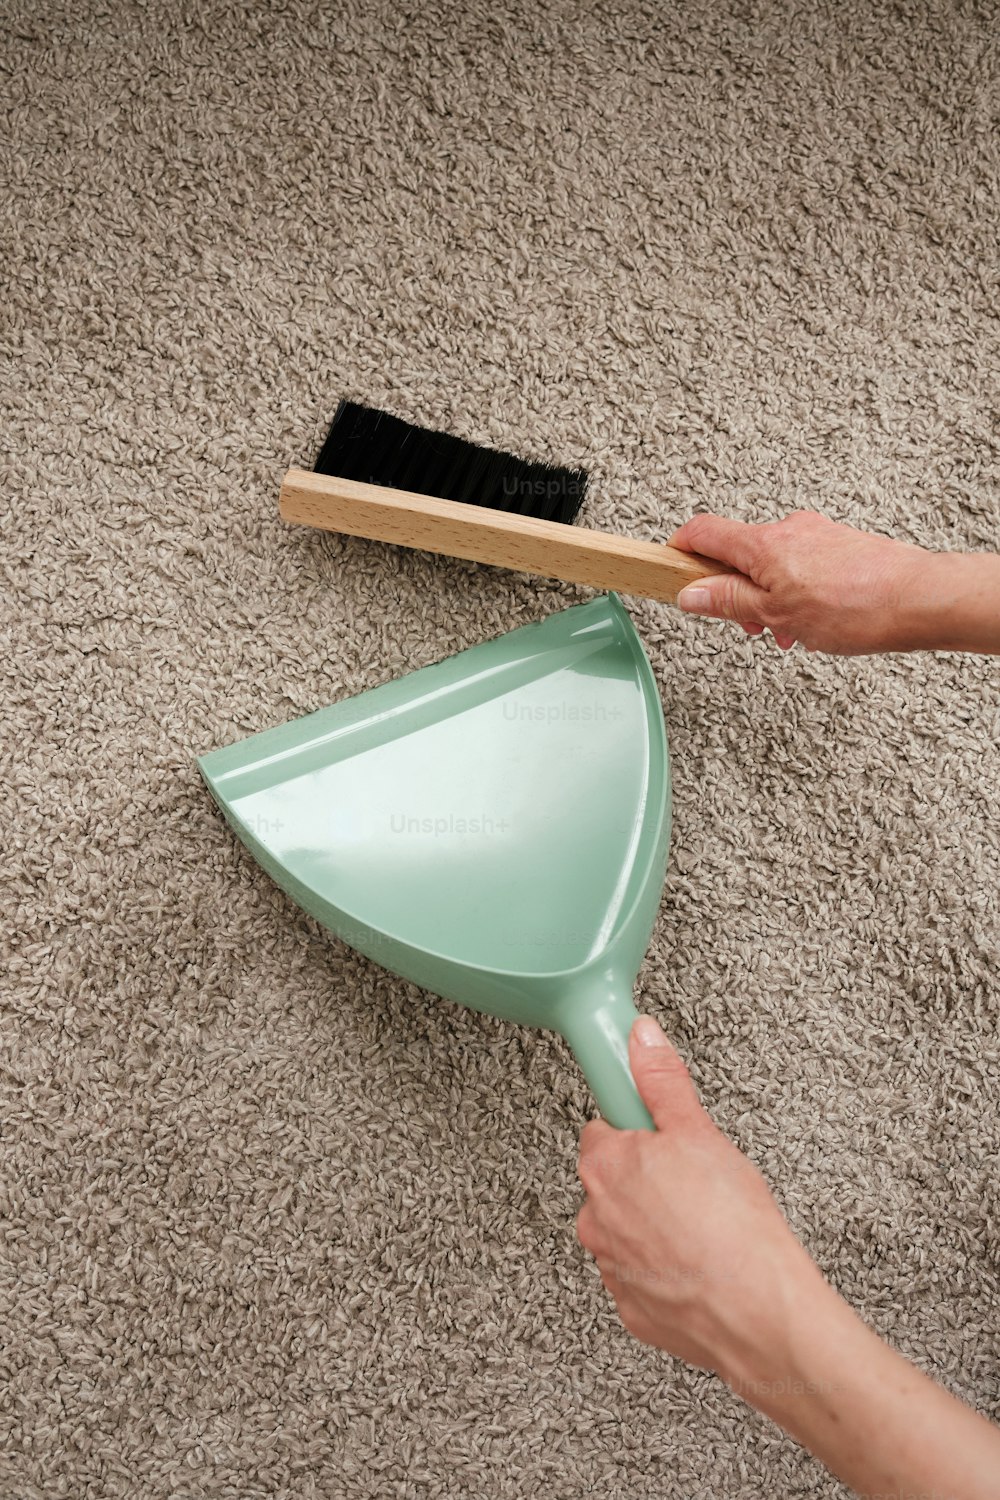 a person holding a dustpan and a dust brush on a carpet